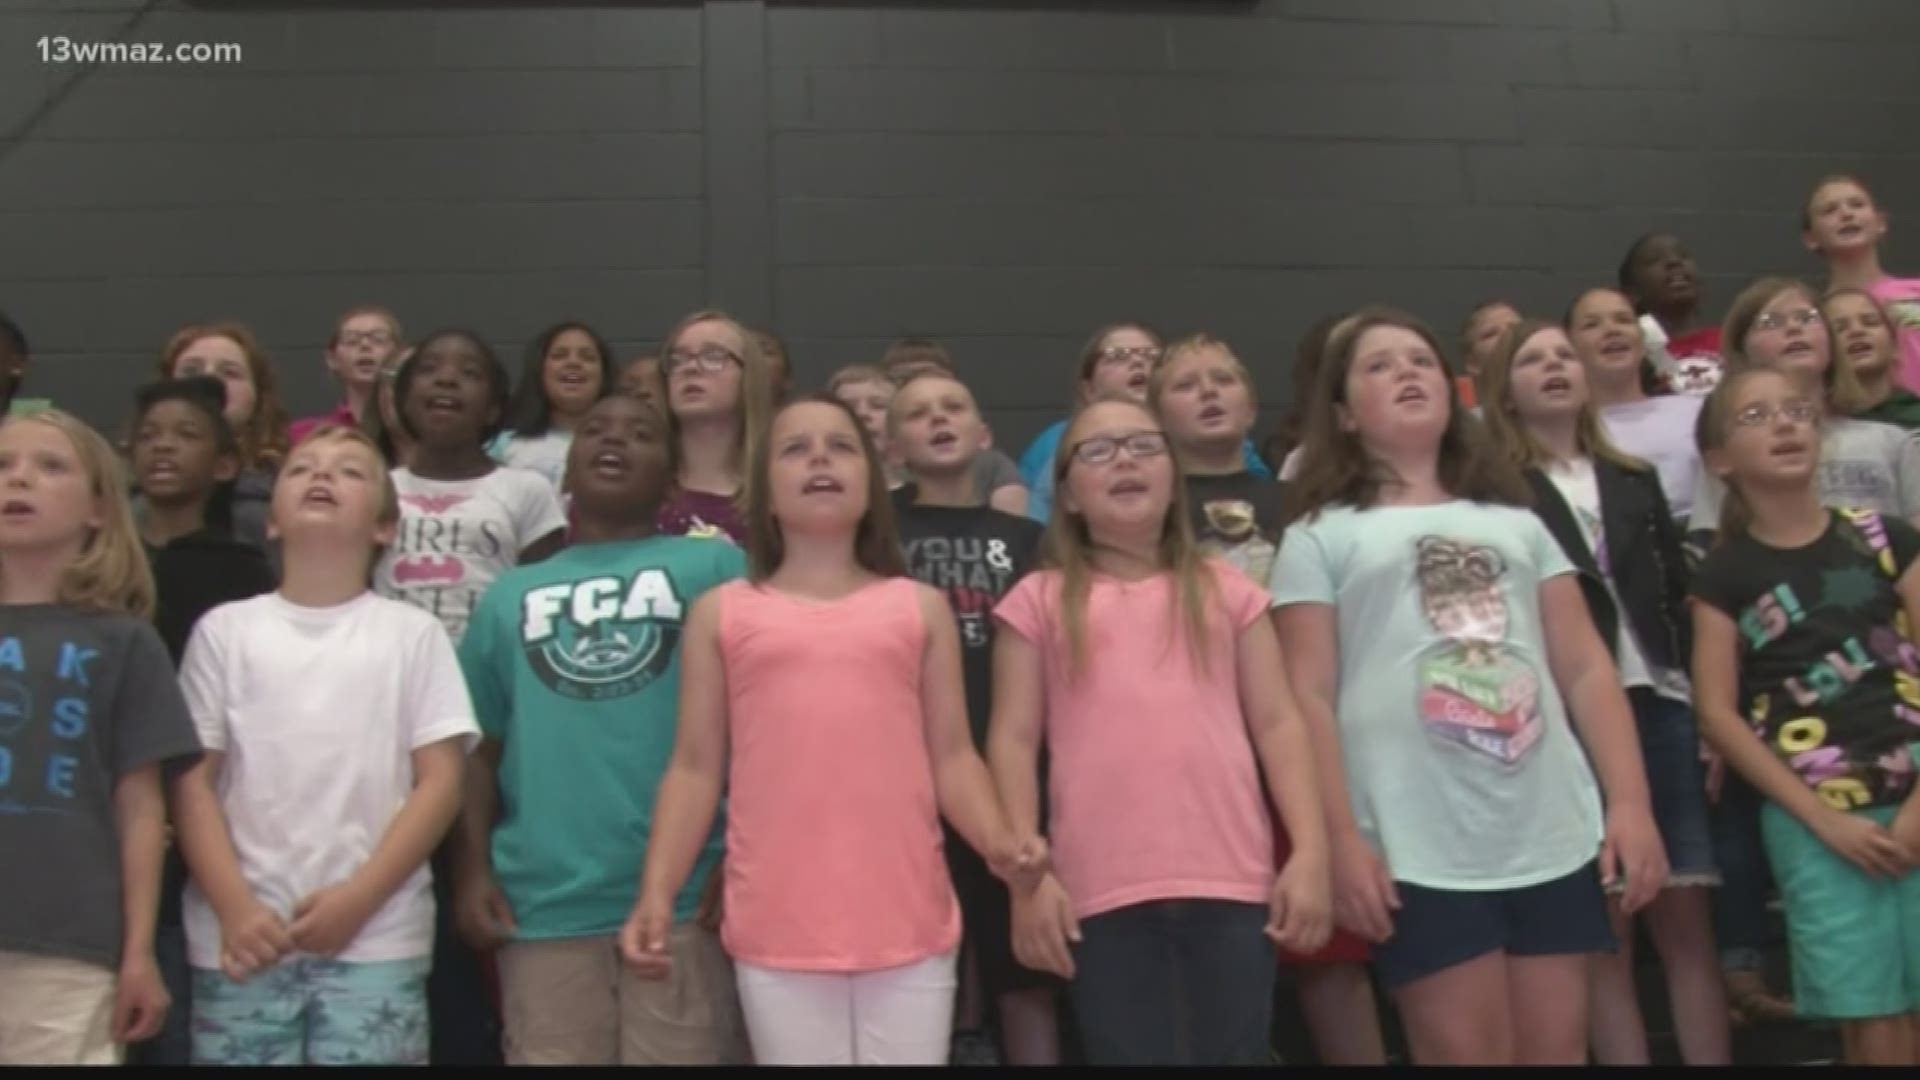 The school's Beta Club ended the school year on a high note by qualifying for the National Songfest Competition. While they got to go to nationals in Savannah last year, they don't have the sufficient funds this year, even though they placed second in the state.